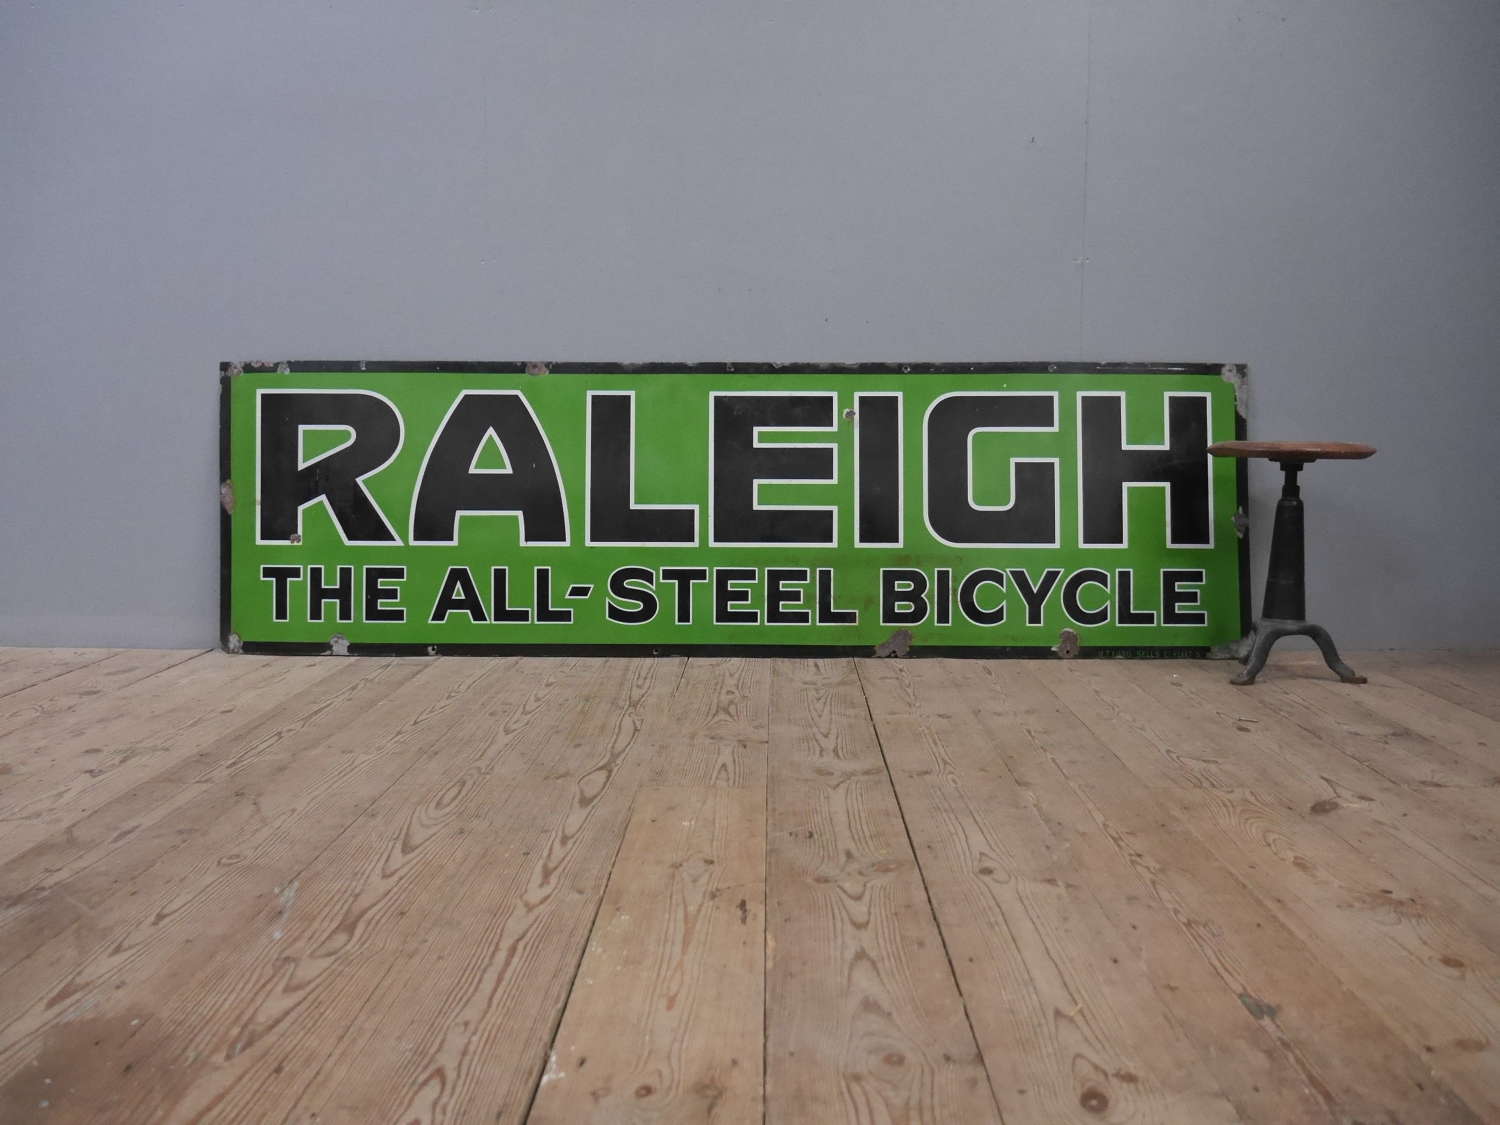 Raleigh - The All Steel Bicycle